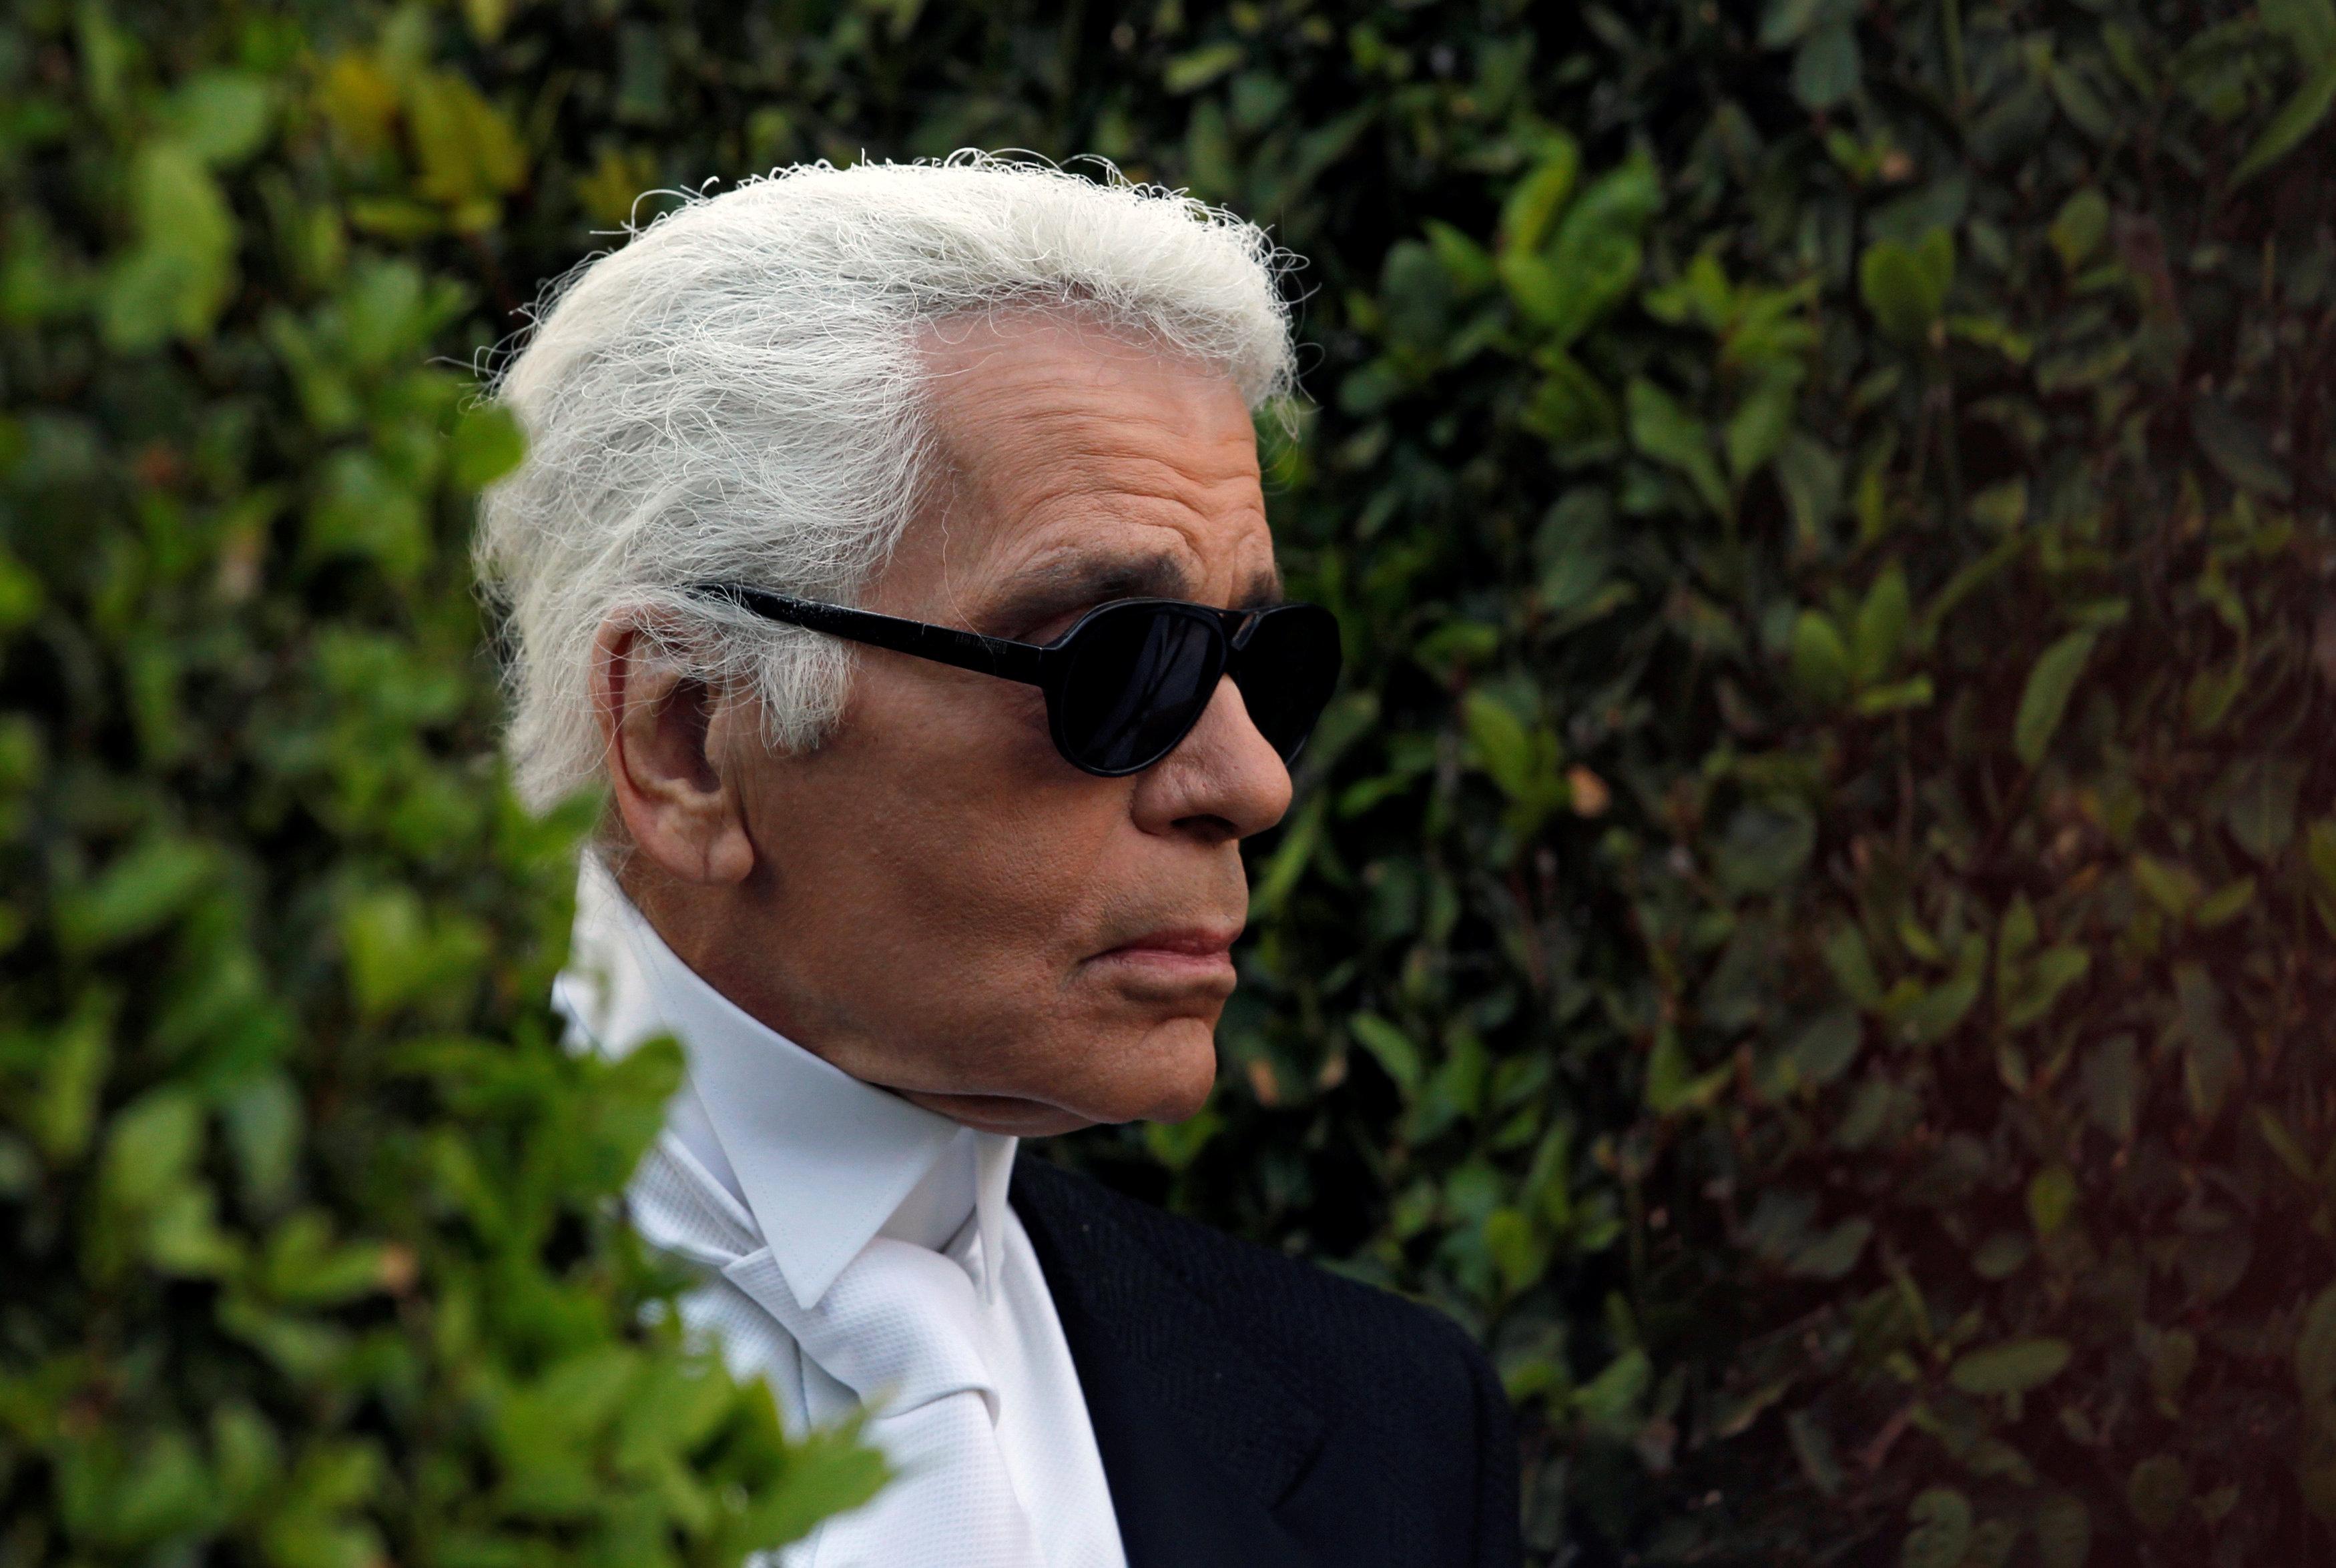 Karl Lagerfeld, the king of fashion, dies at 85 - Retail in Asia